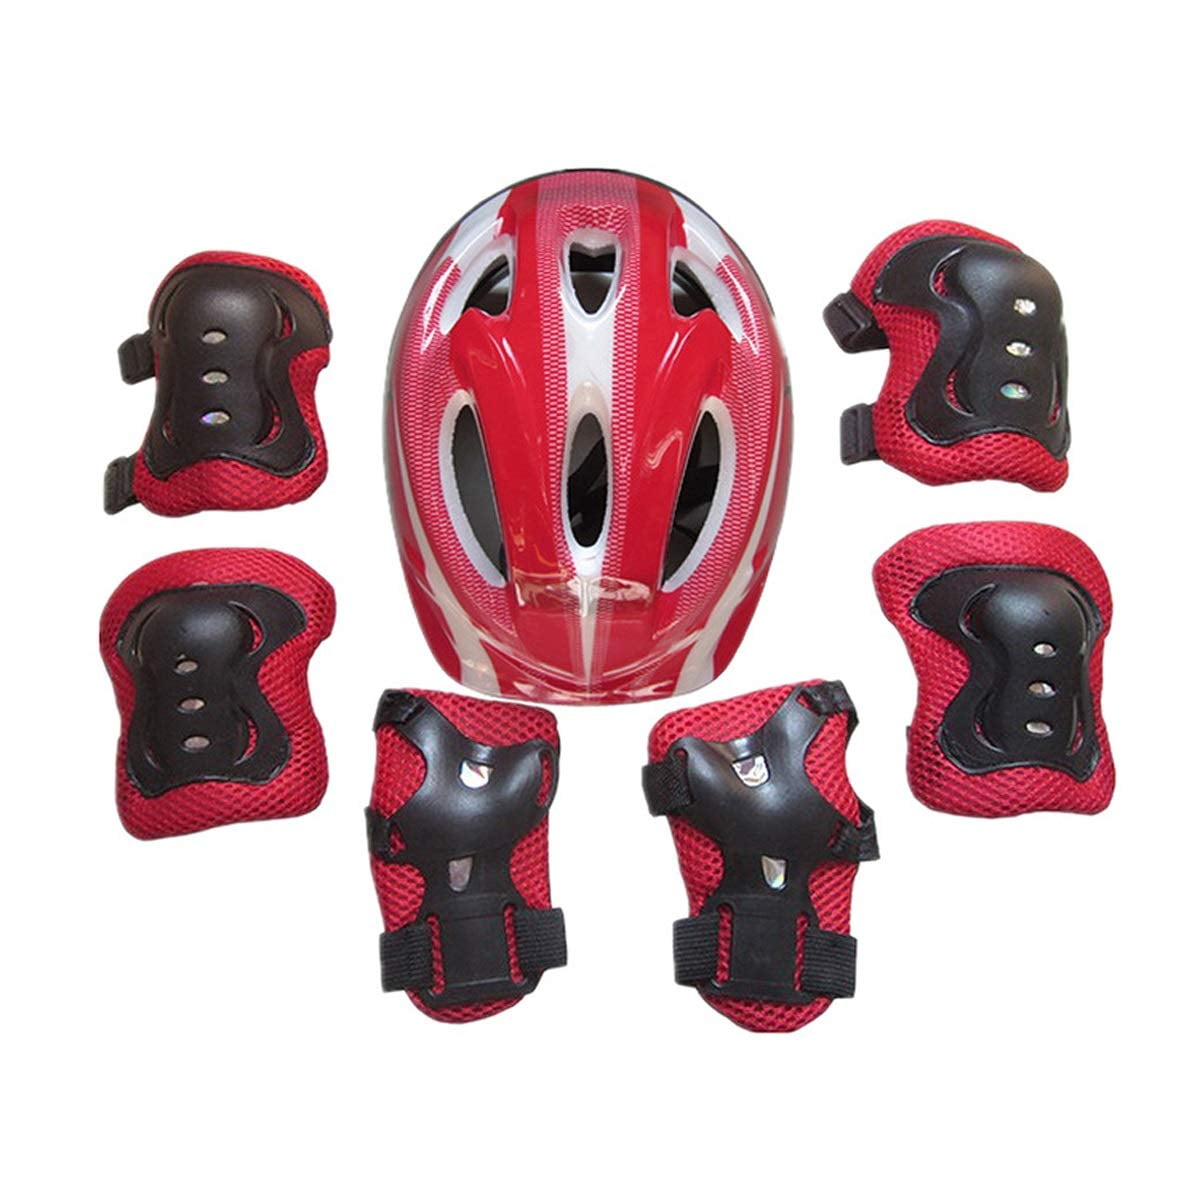 AODI Kids Protective Gear Set for Kids 3-8 Years Adjustable Helmet Knee Elbow Pads Wrist Guards for Multi-Sports Cycling Bicycling Skateboard Bike Scooter Rollerblading 7 Piece Set 